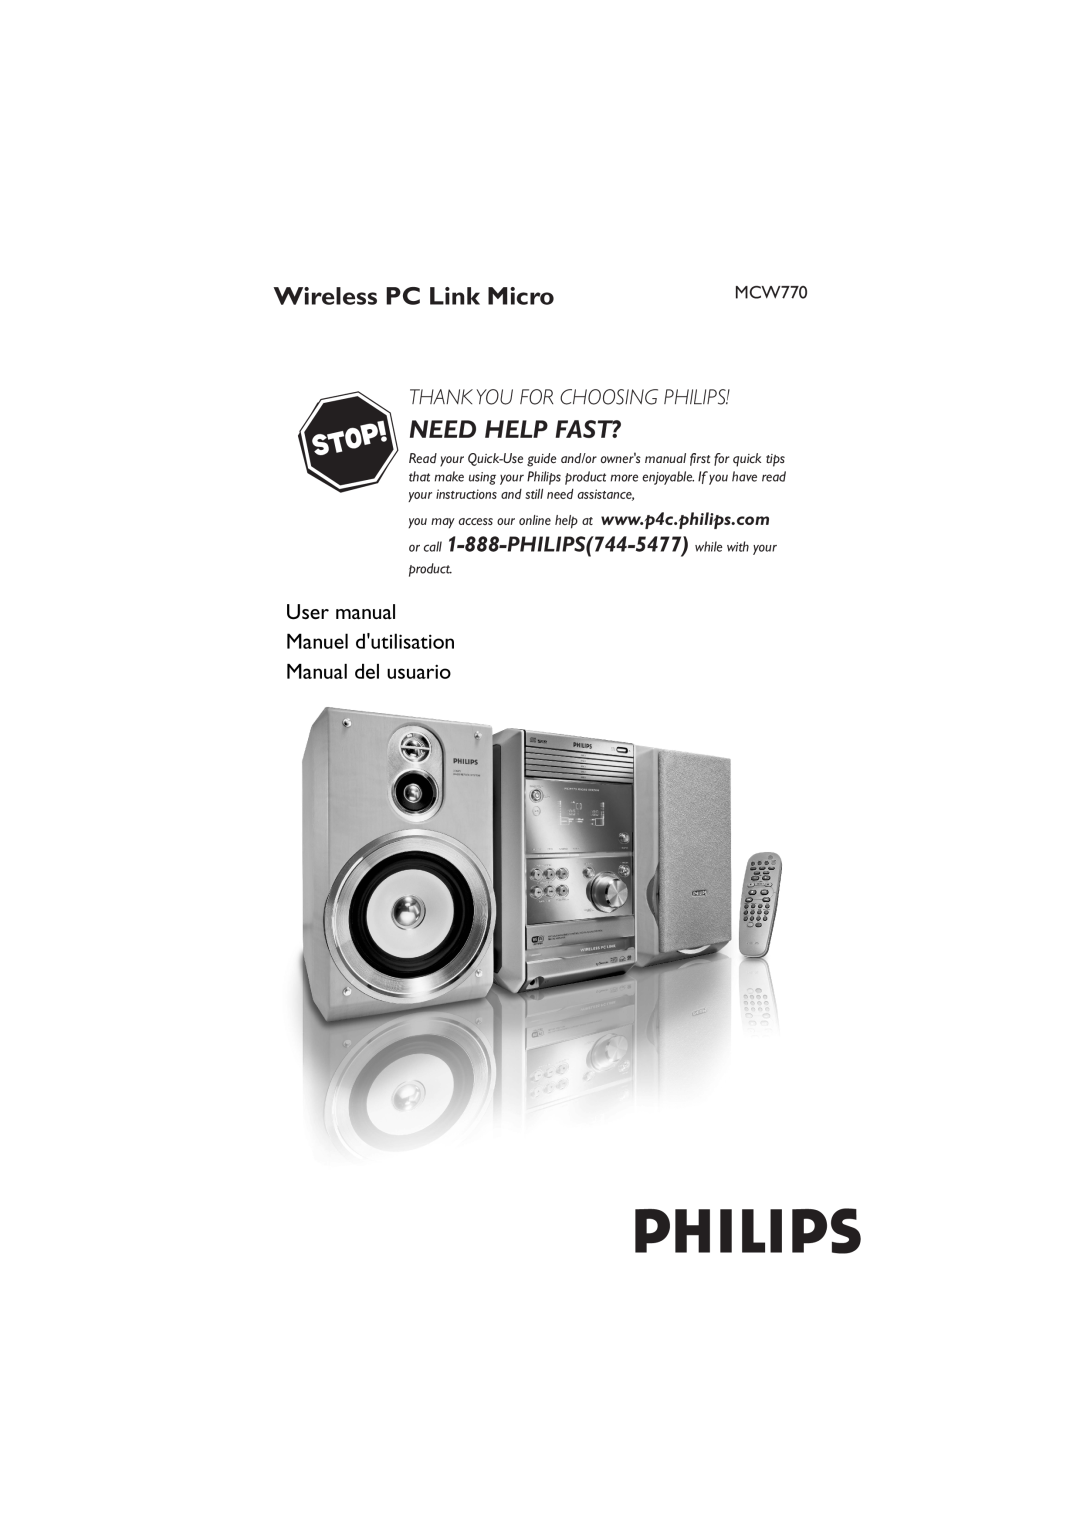 Philips MCW770 Wireless PC Link Micro, Need Help Fast?, Thank You For Choosing Philips, User manual Manuel dutilisation 